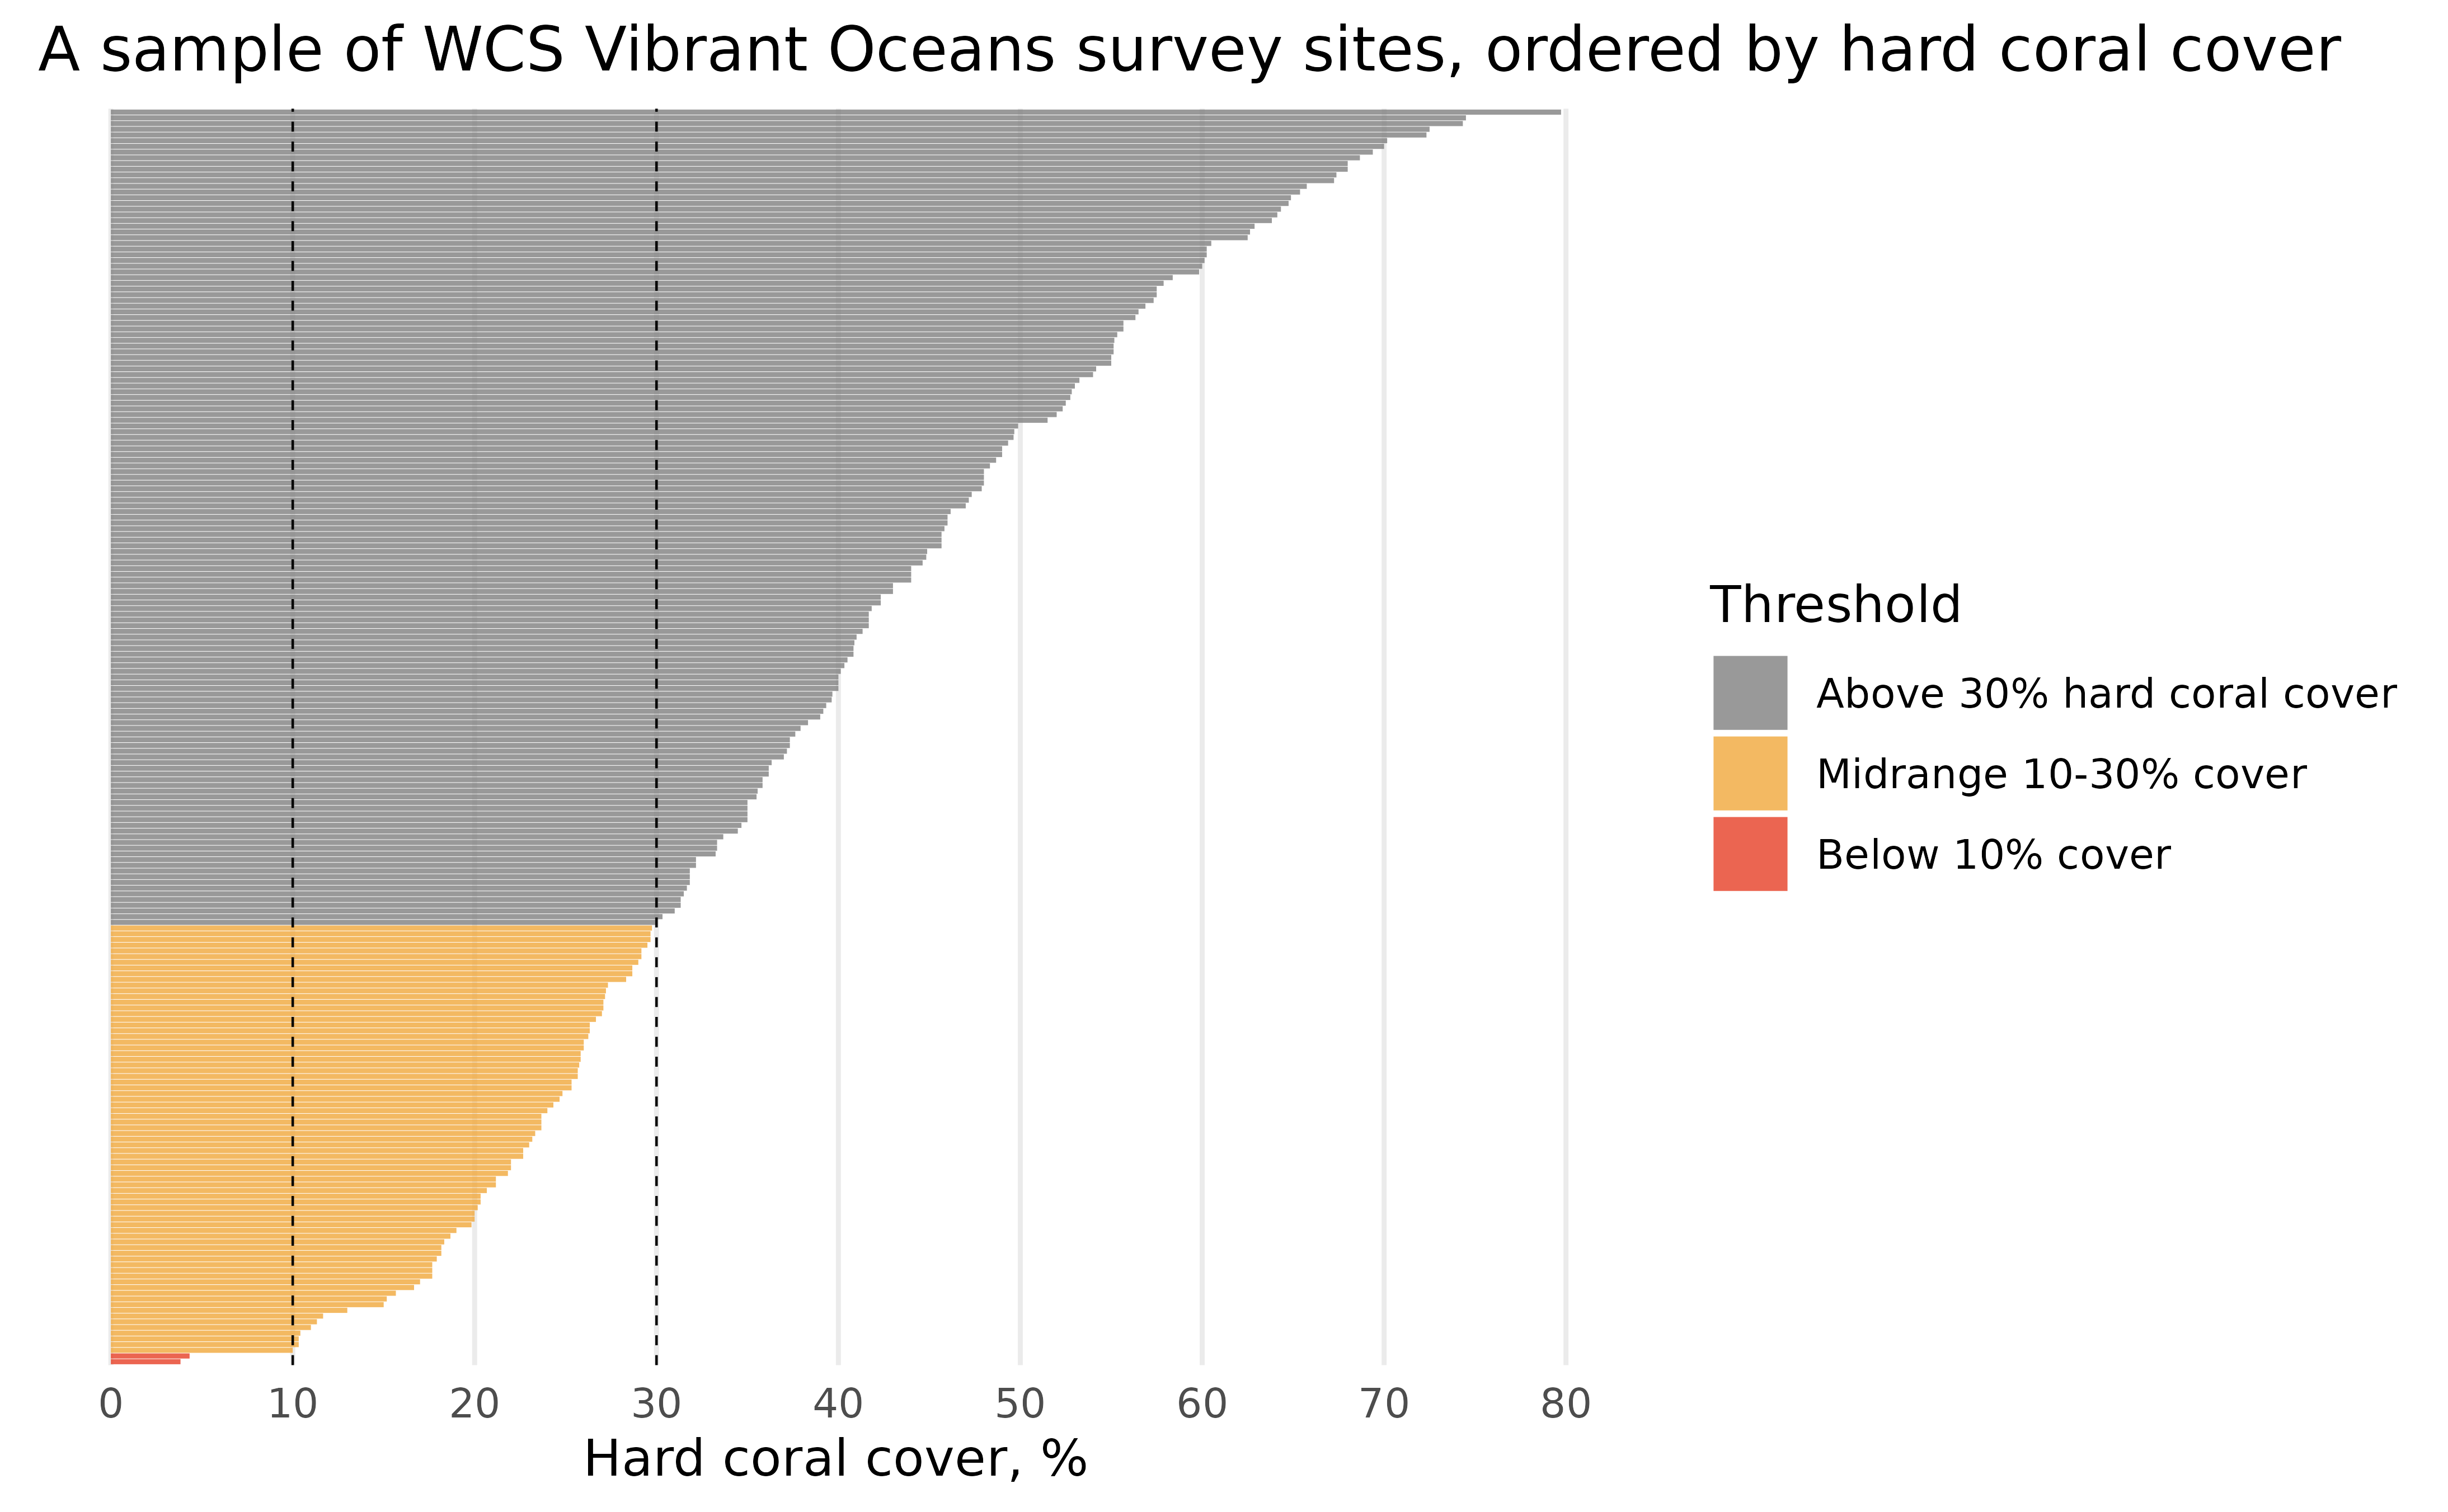 A bar chart with hard coral cover on the x axis and sites on the y axis. The bars are colored in grey, yellow, and red, according to whether they have above 30% hard coral cover, 10-30% cover, or below 10% cover. The sites are ordered by their hard coral coverage, from highest to lowest. There is a vertical line at 10% and 30% hard coral cover. The site names have been removed and the plot now has a title: A sample of WCS Vibrant Ocean survey sites, ordered by hard coral cover. The x axis is titled: Hard coral cover, %.